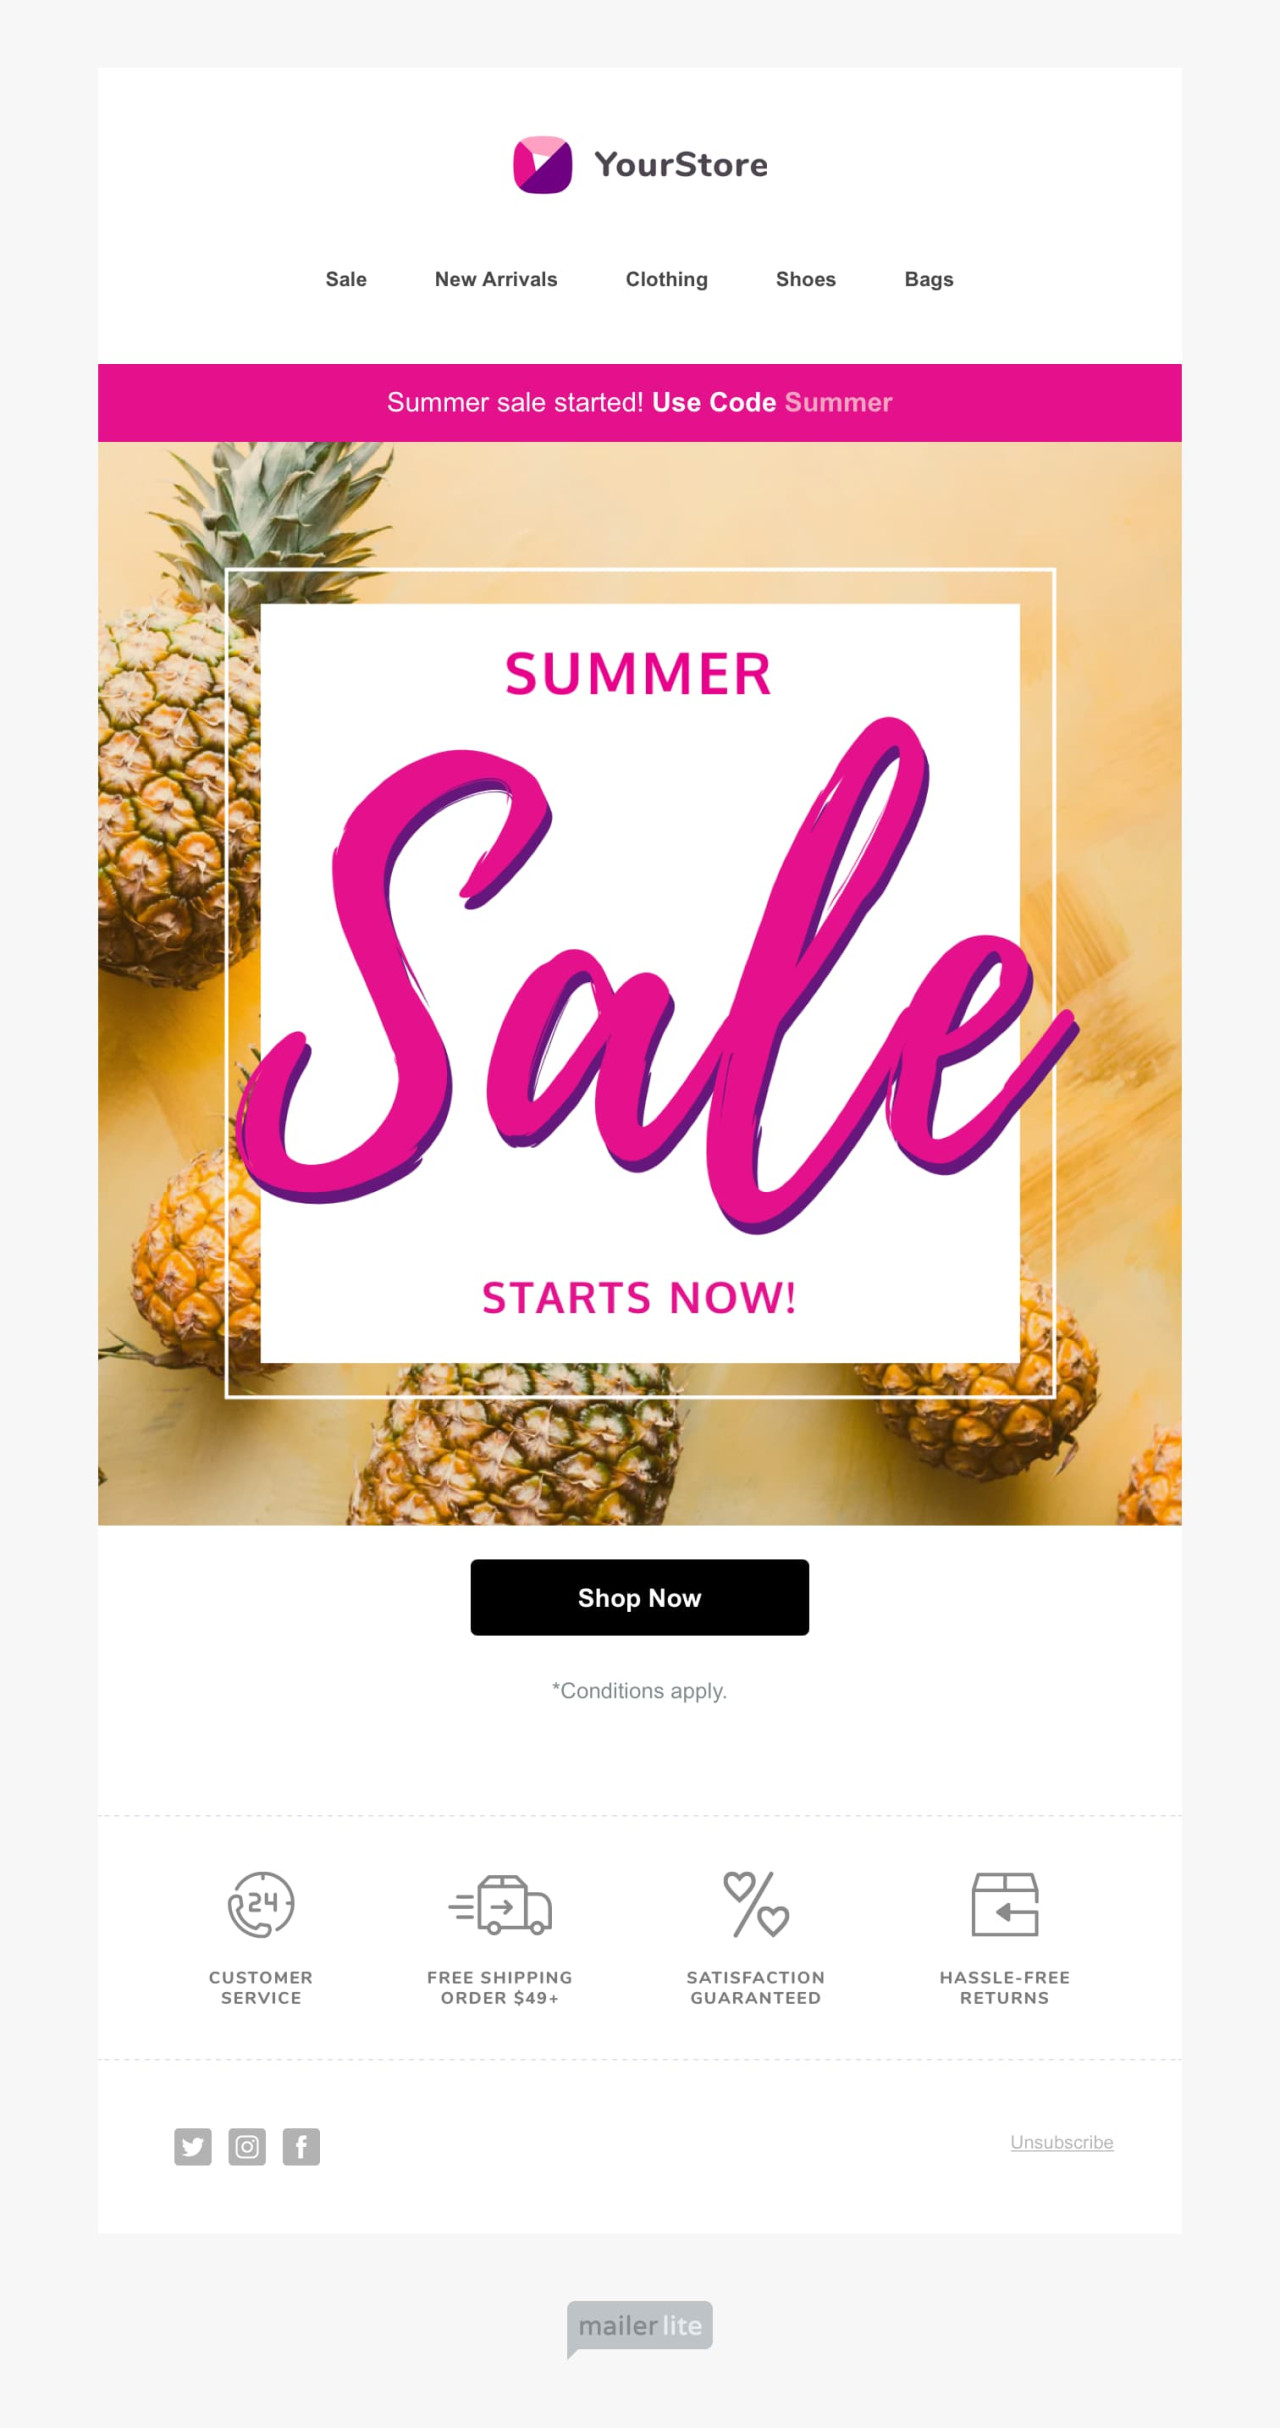 Summer sale email template - Made by MailerLite